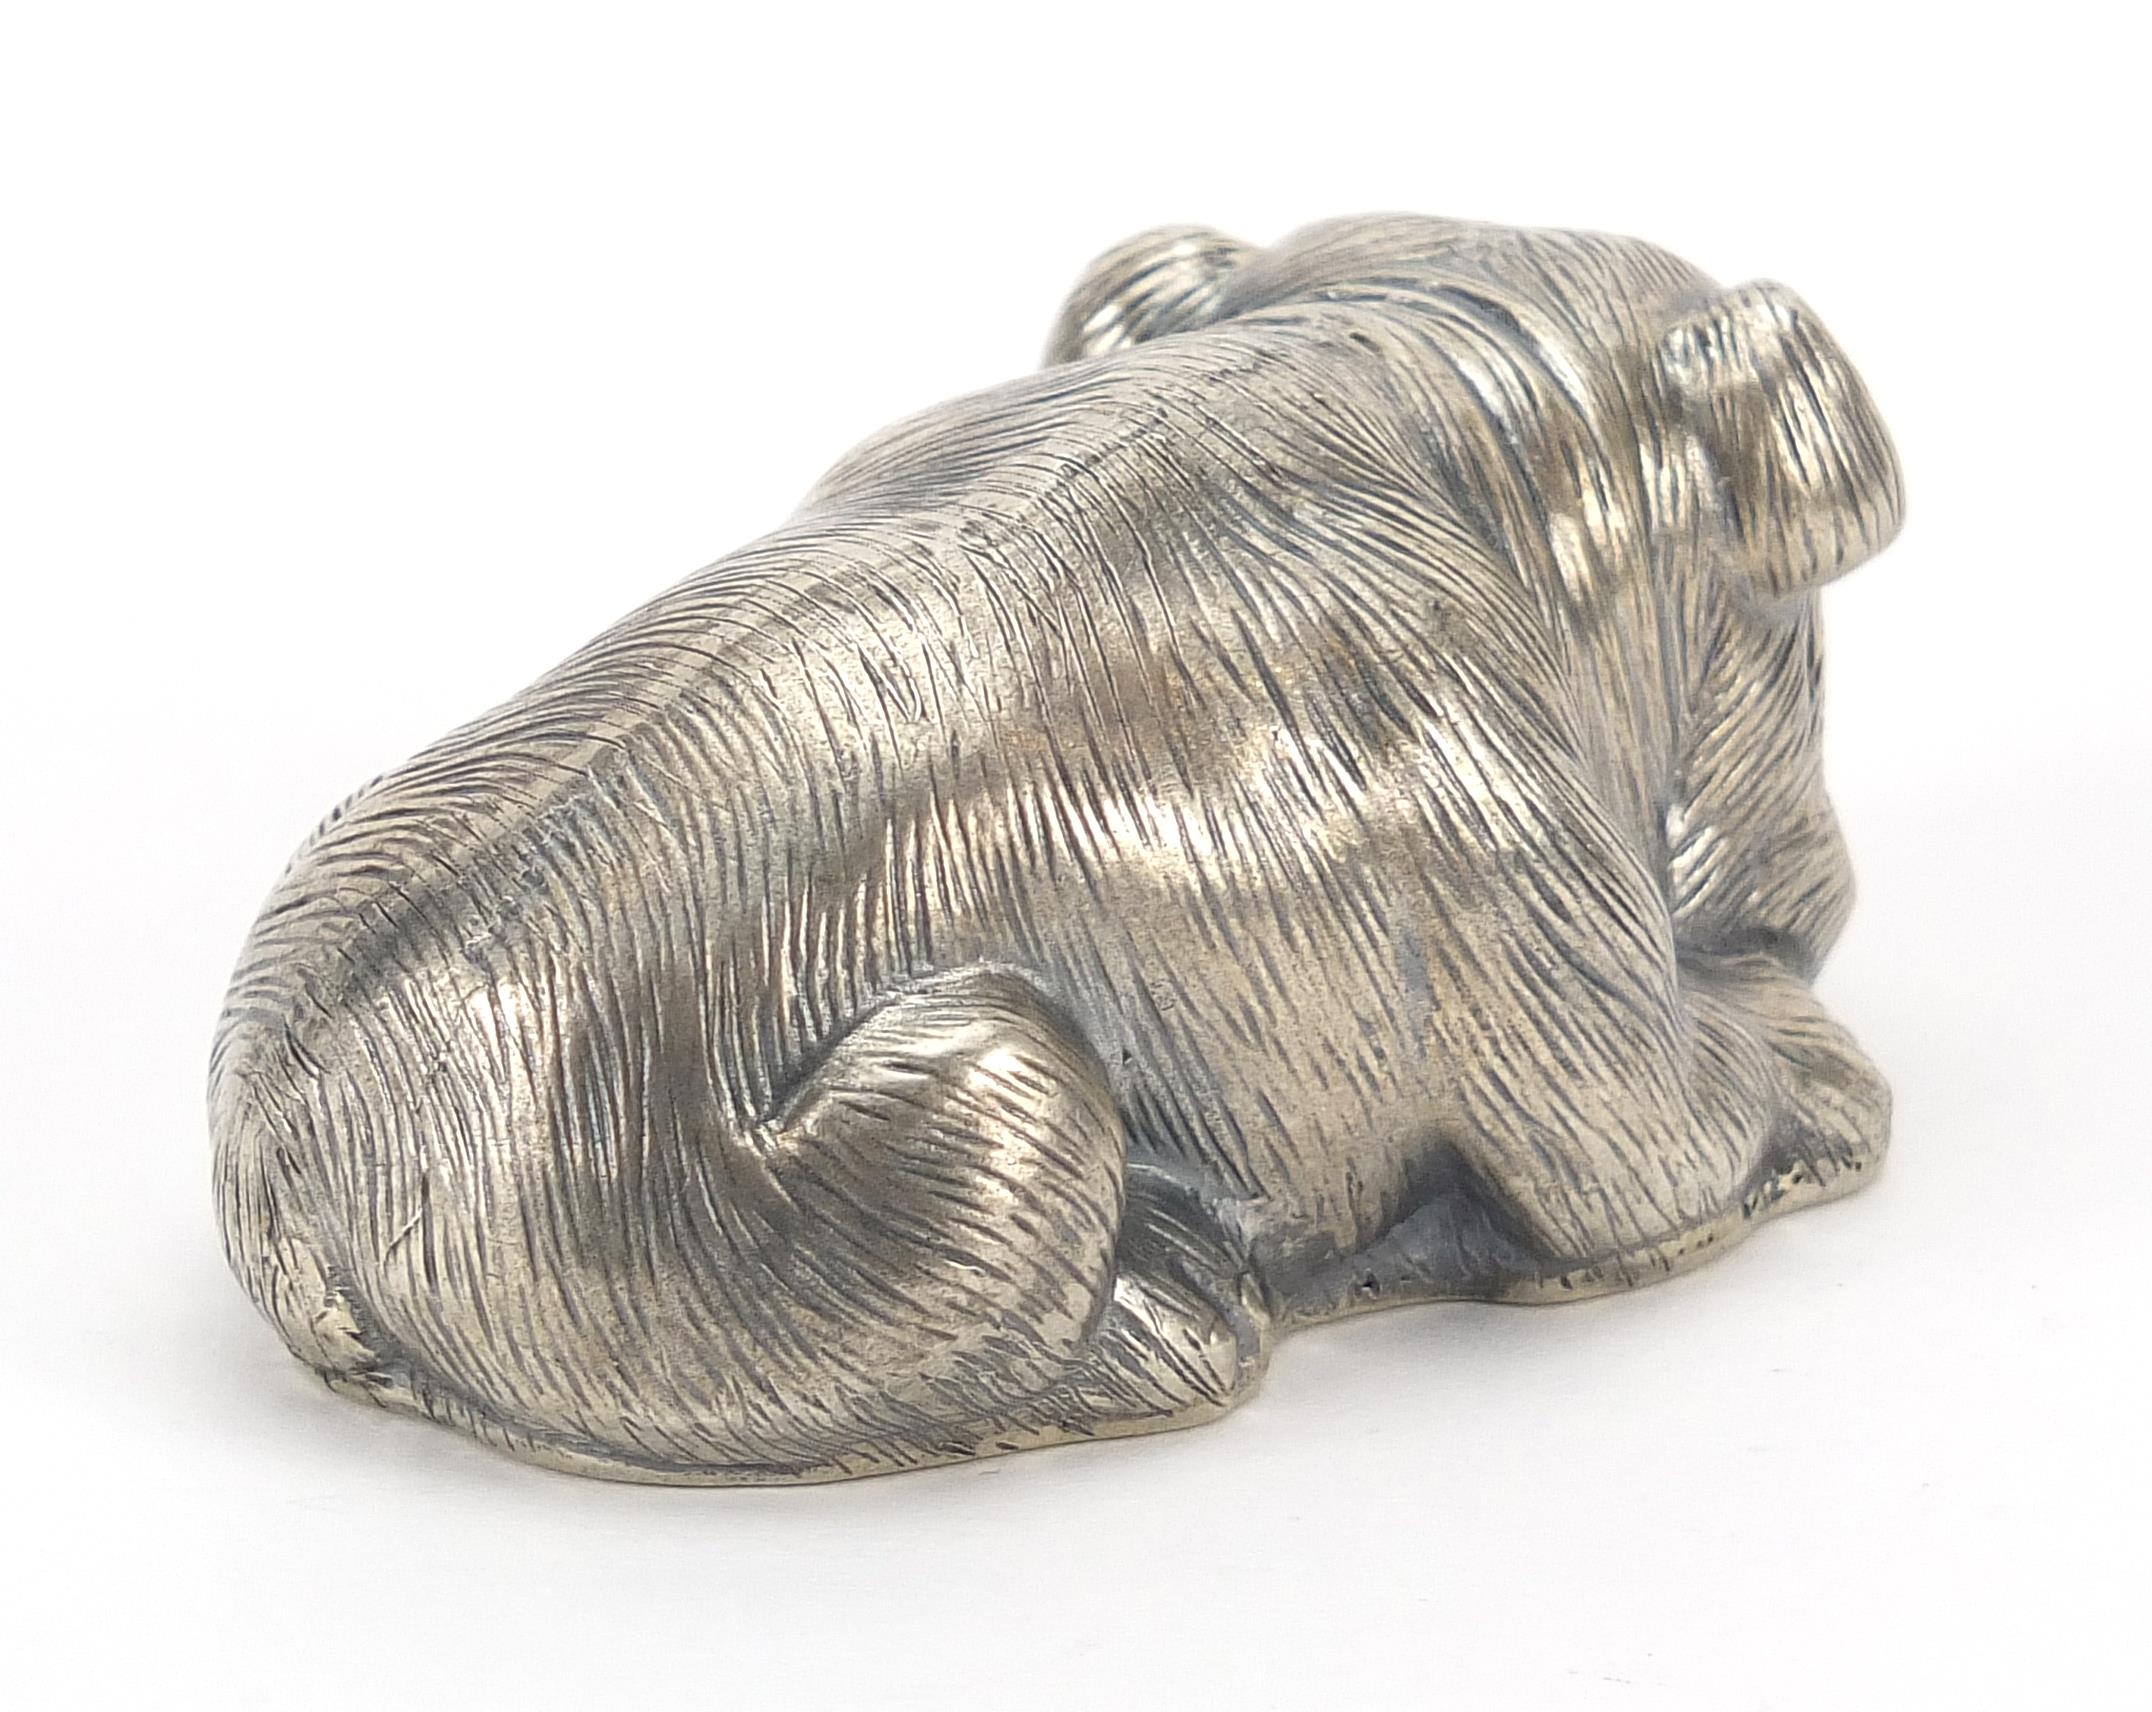 Silver English Bulldog paperweight with ruby eyes, impressed Russian marks to the base, 6.5cm - Image 2 of 4